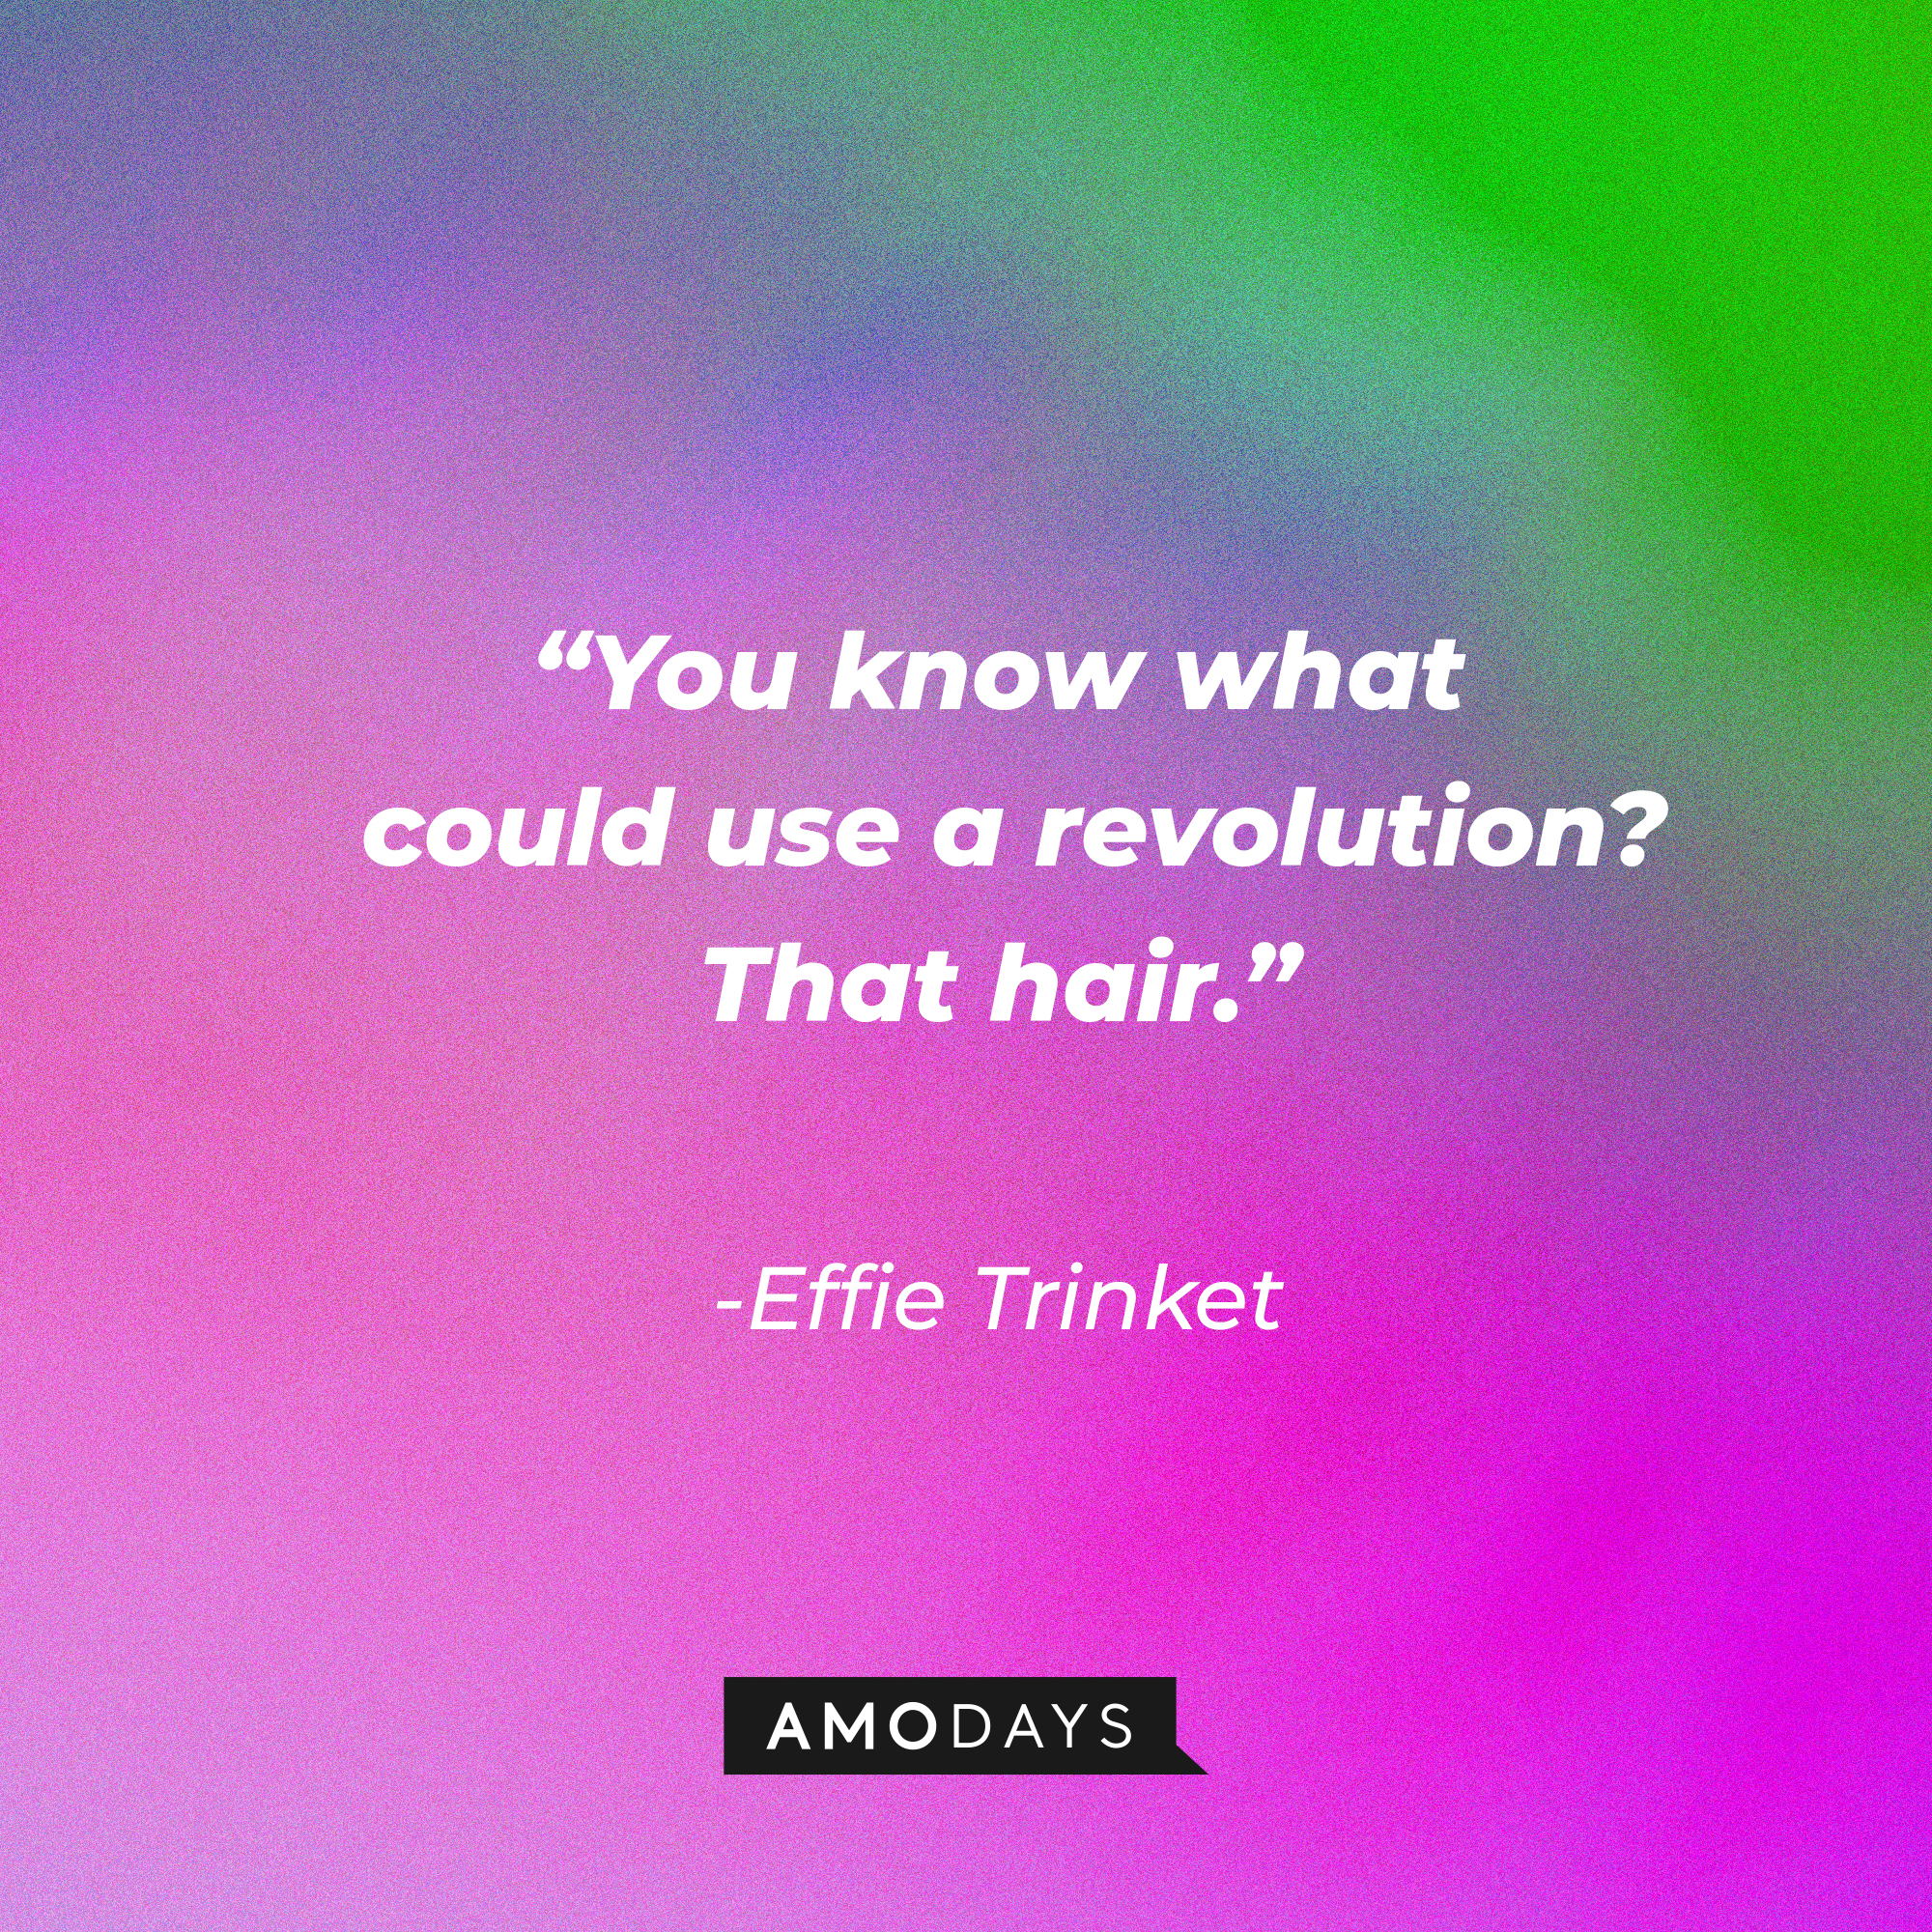 Effie Trinket's quote: "You know what could use a revolution? That hair."  | Source: AmoDays